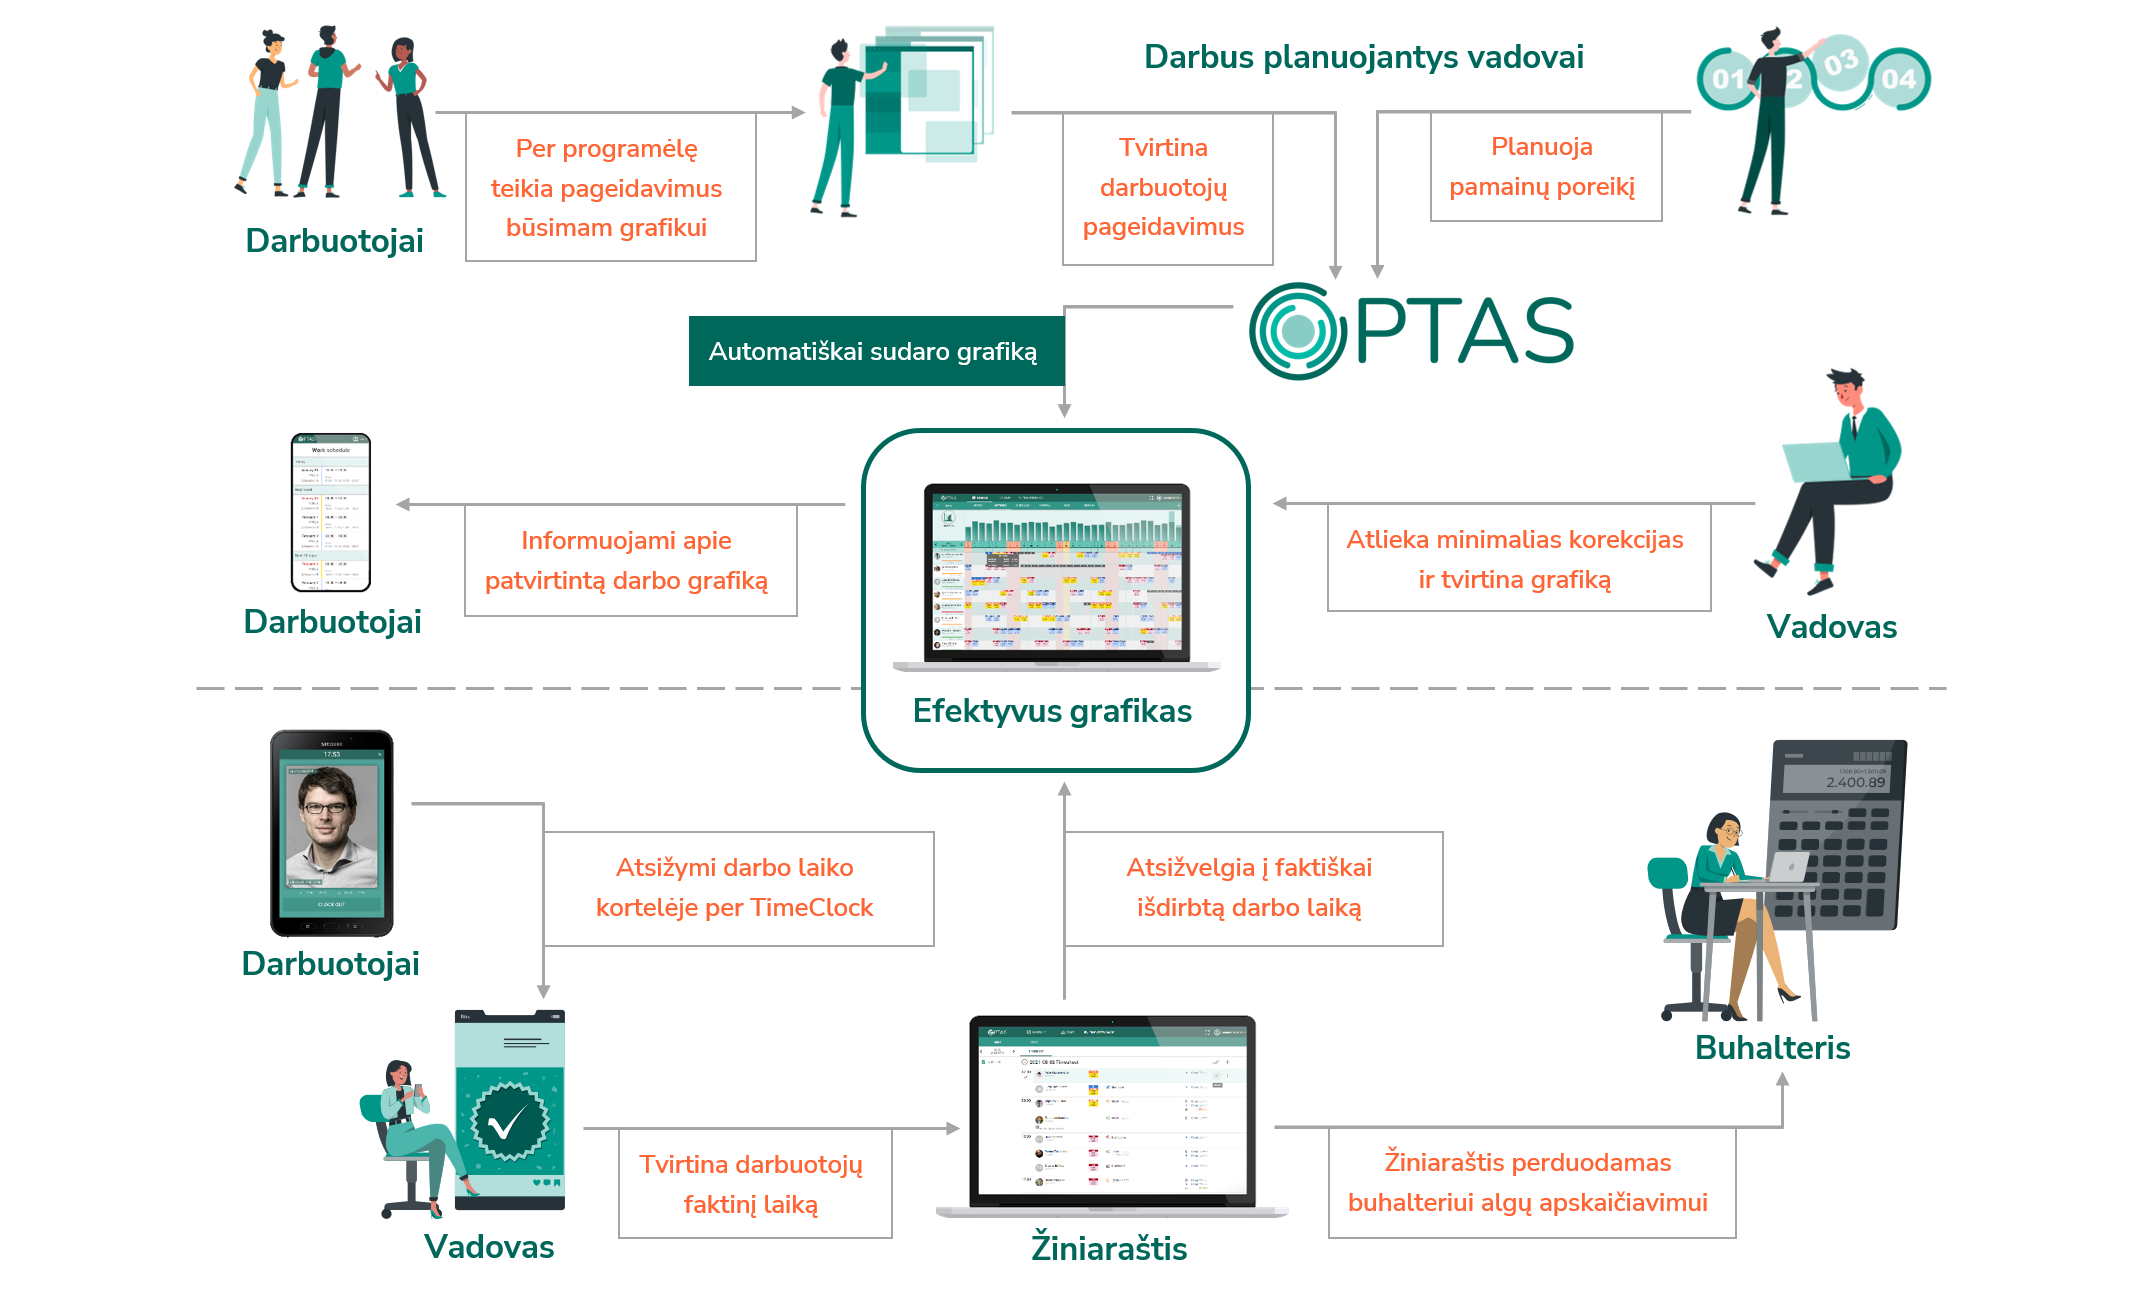 Automated work scheduling process with OPTAS system